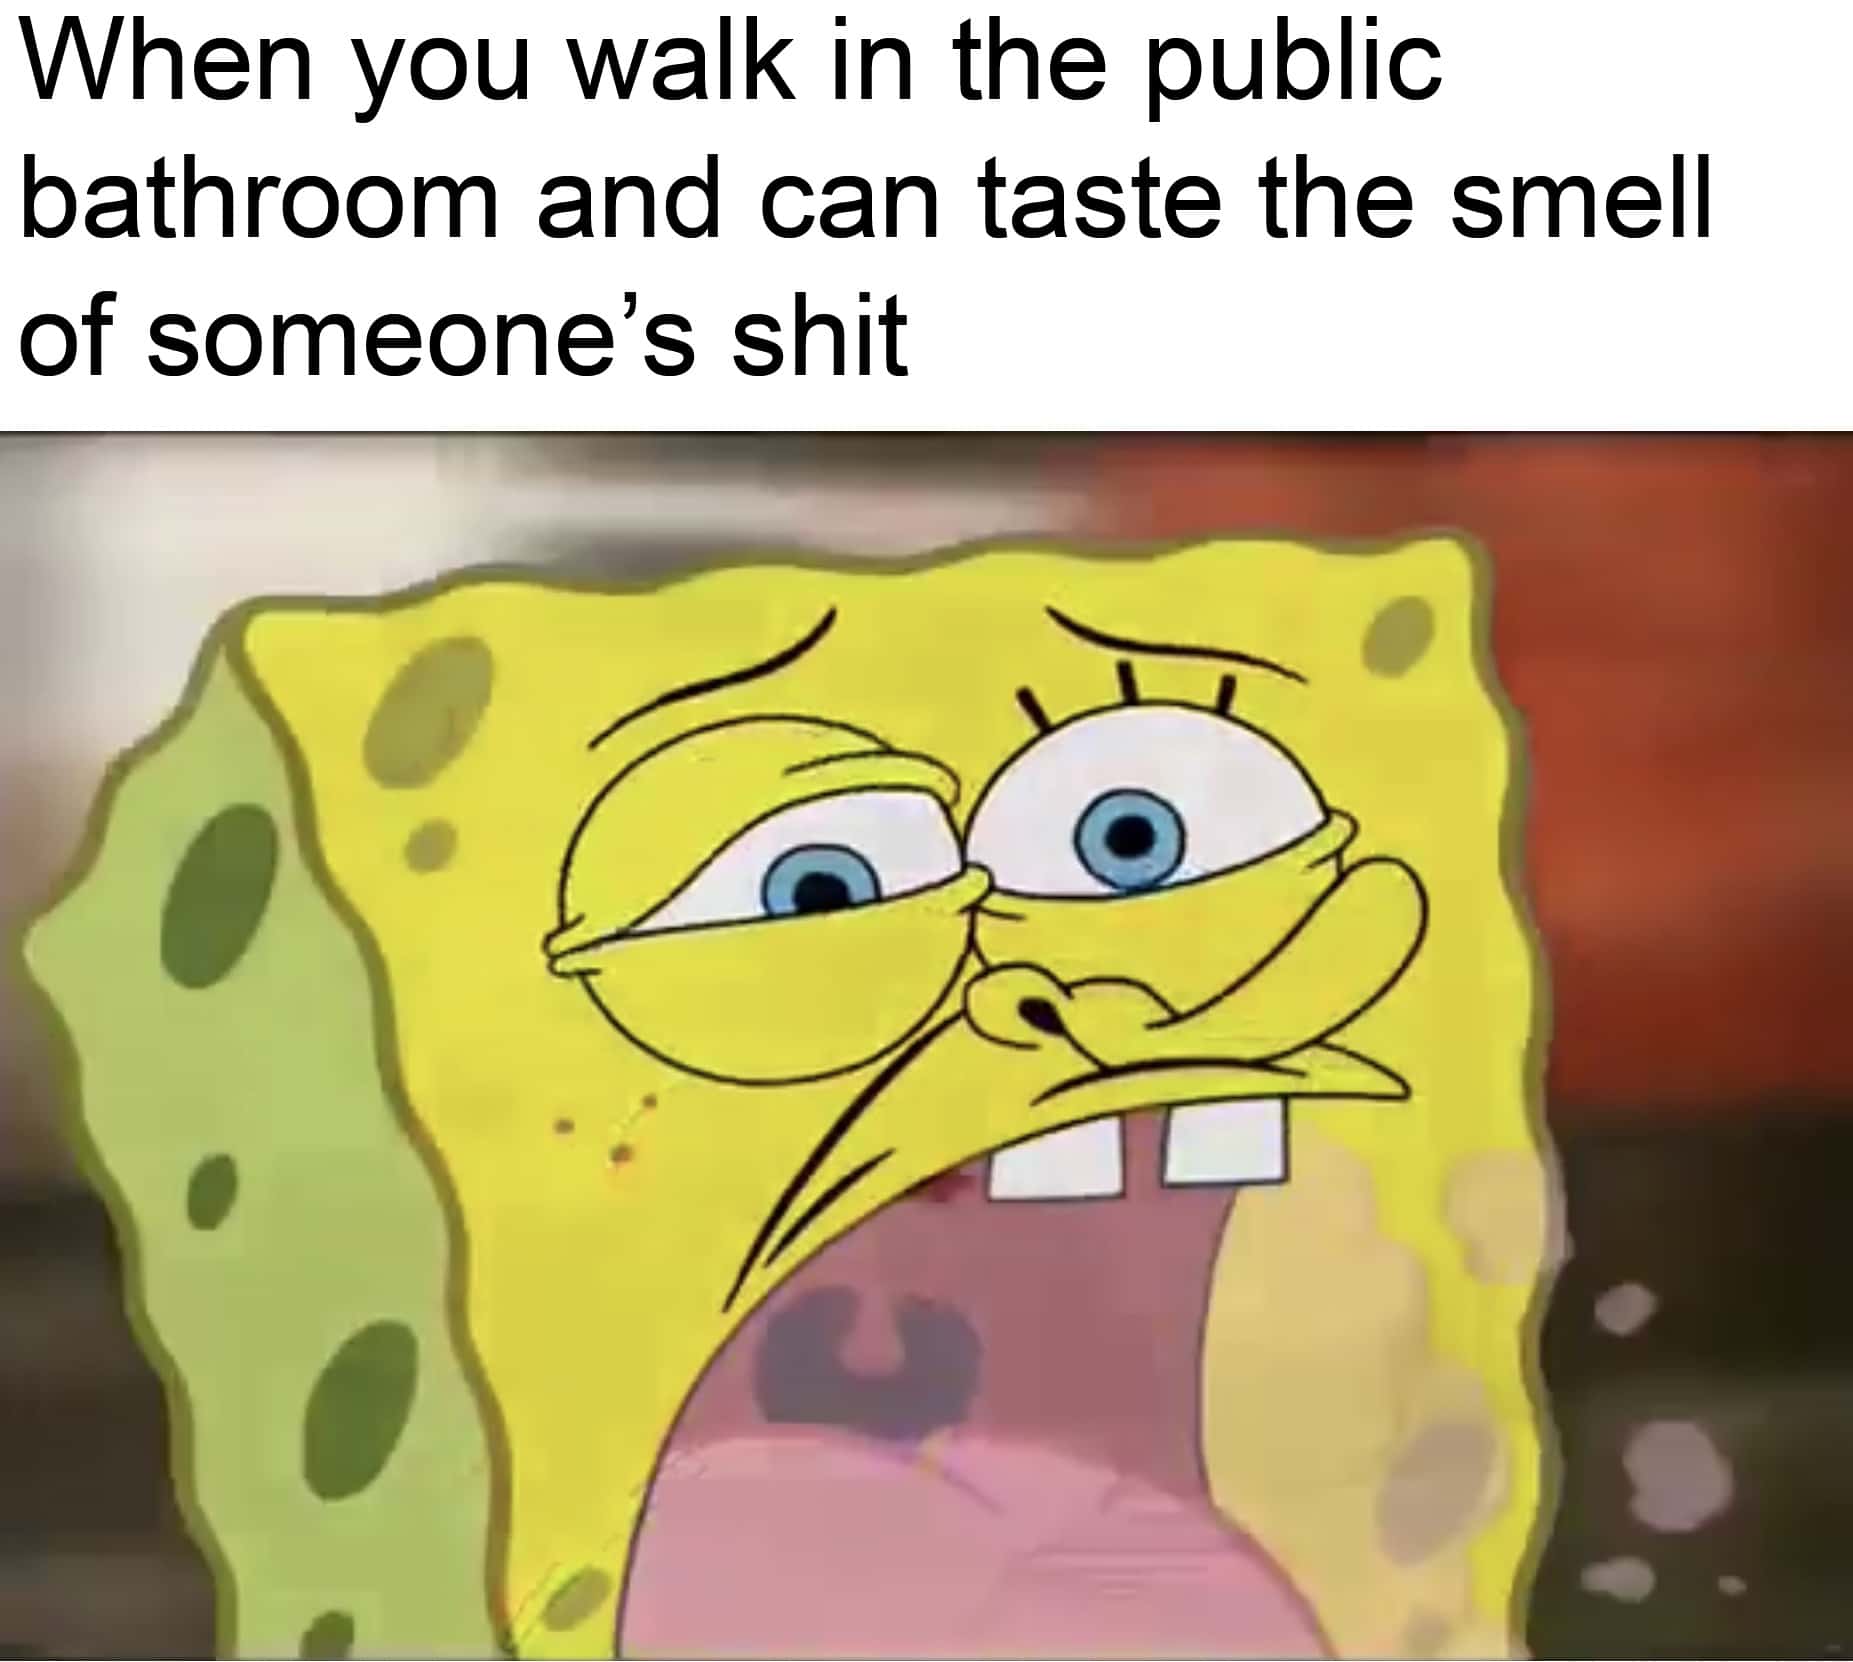 spongebob spongebob-memes spongebob text: When you walk in the public bathroom and can taste the smell of someone's shit 